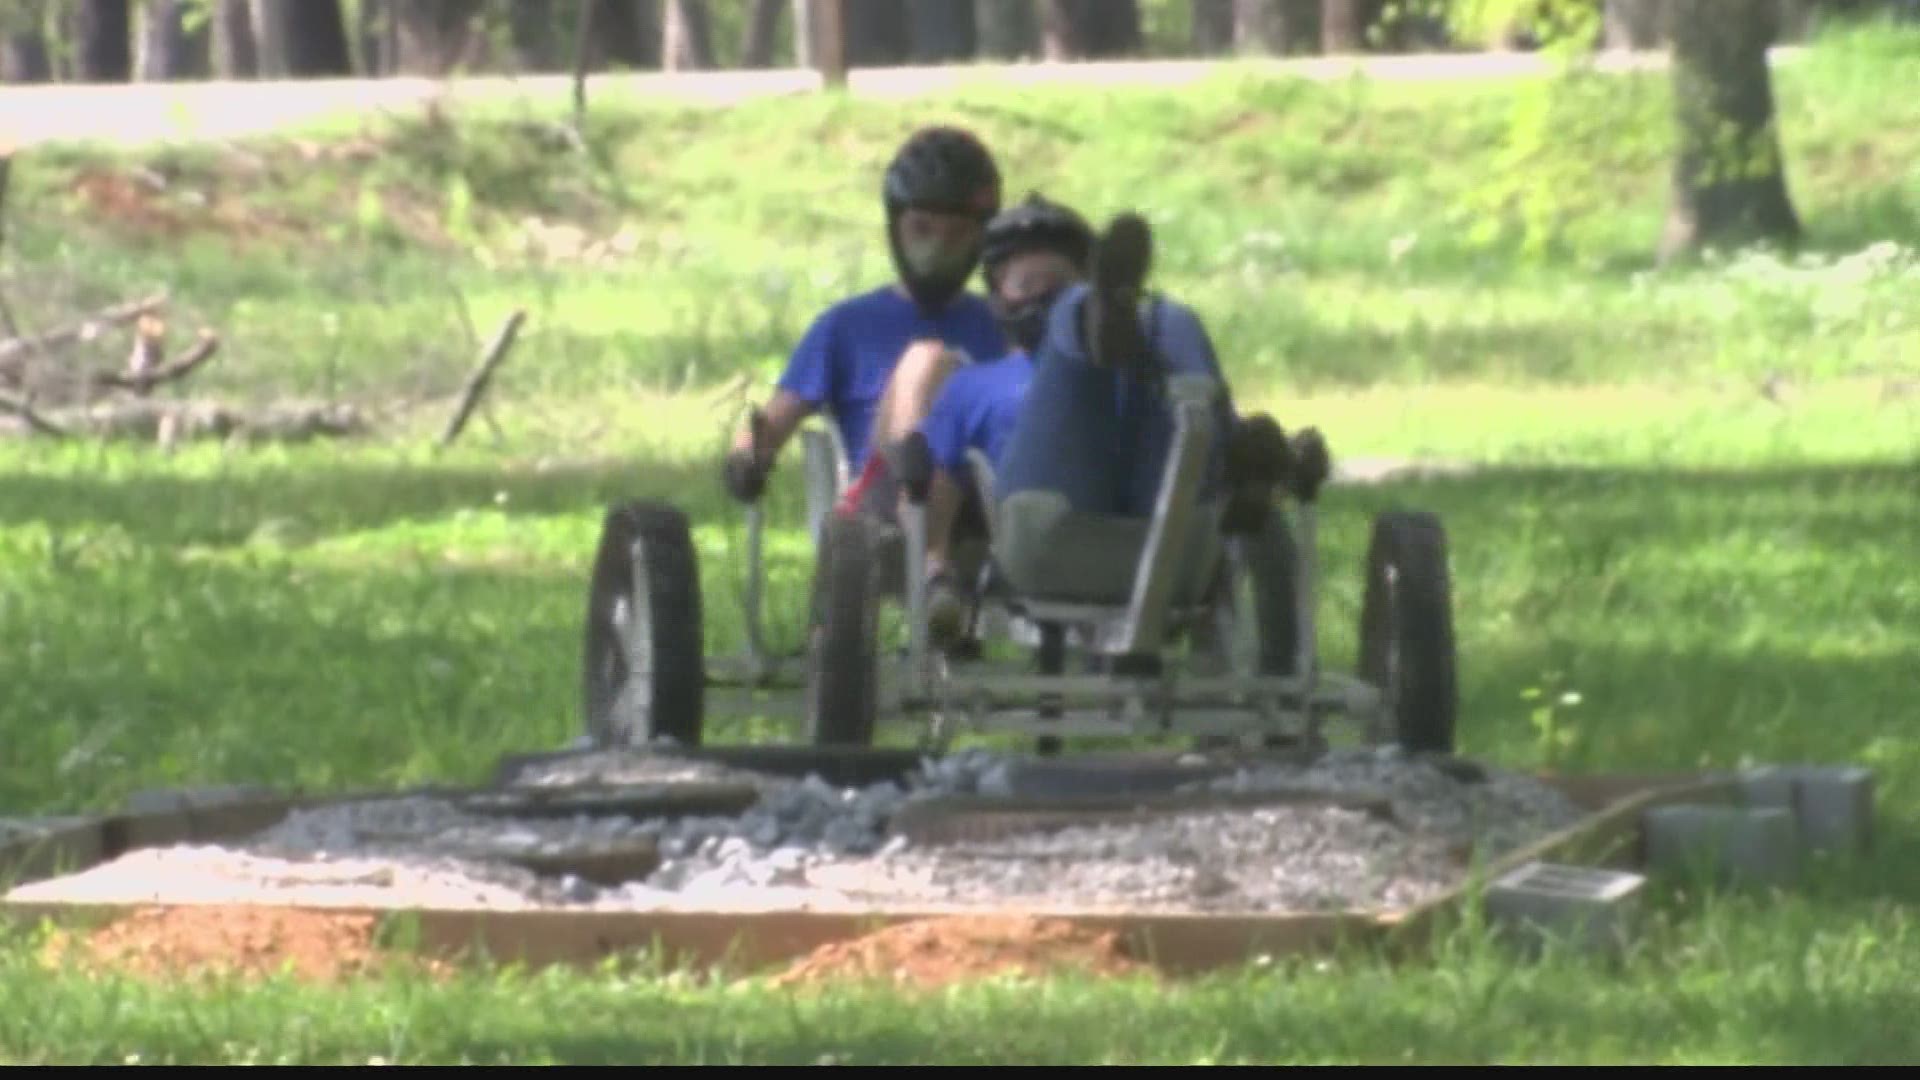 Students at The University of Alabama in Huntsville (UAH), have teamed up to compete in a space rover challenge.